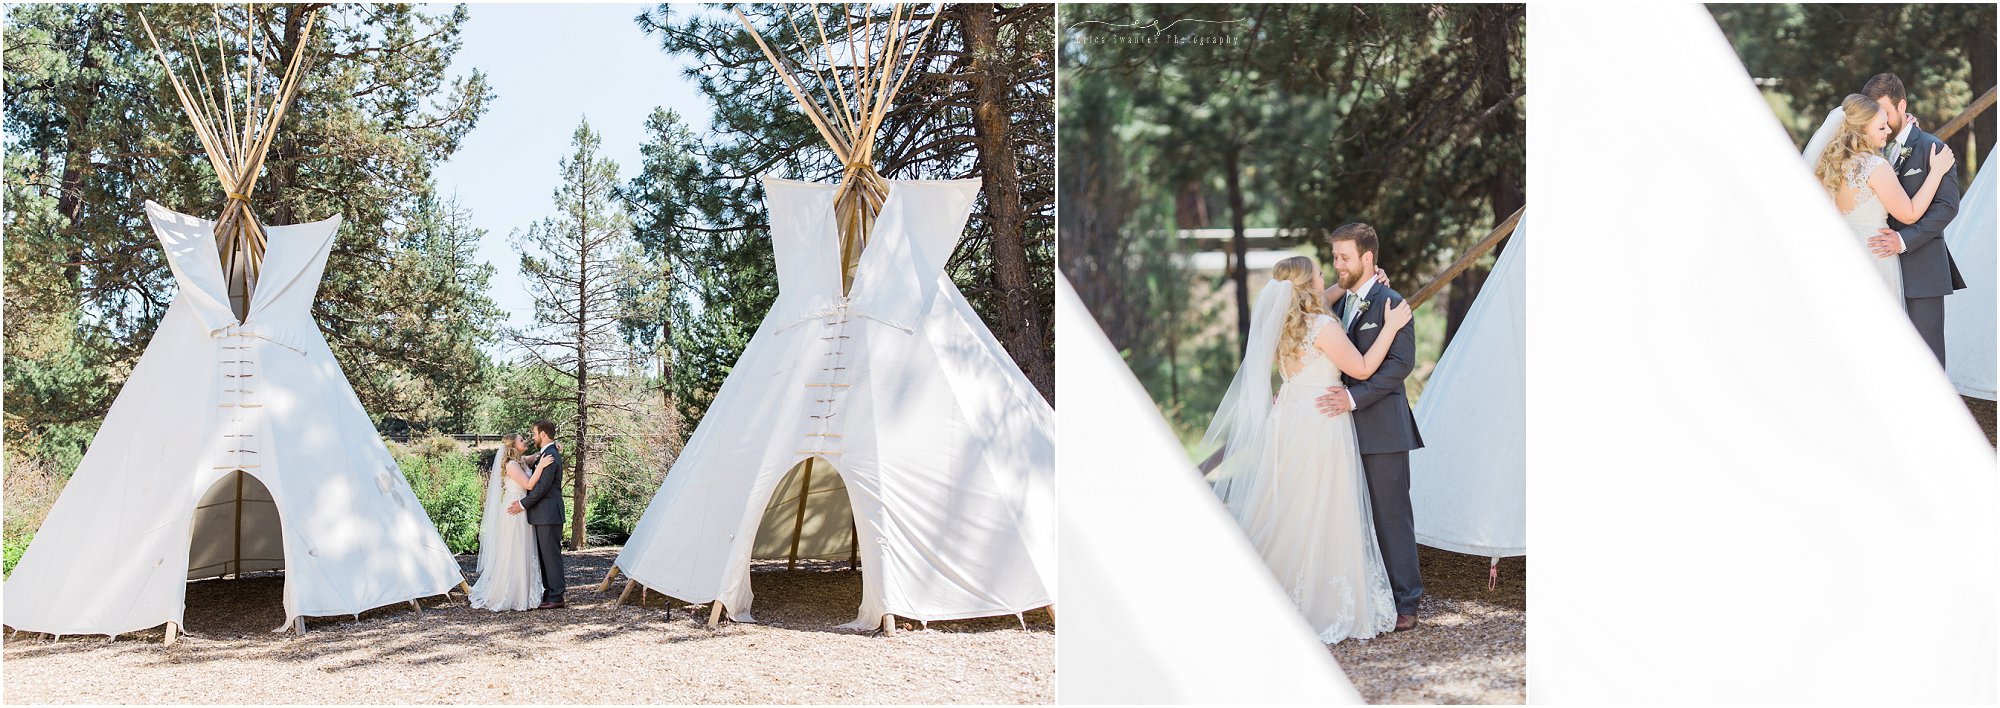 The tepees were set up outside of Aspen Hall in Shevlin Park, making for some beautiful portraits for the wedding couple at this vintage rustic chic Bend wedding. | Erica Swantek Photography